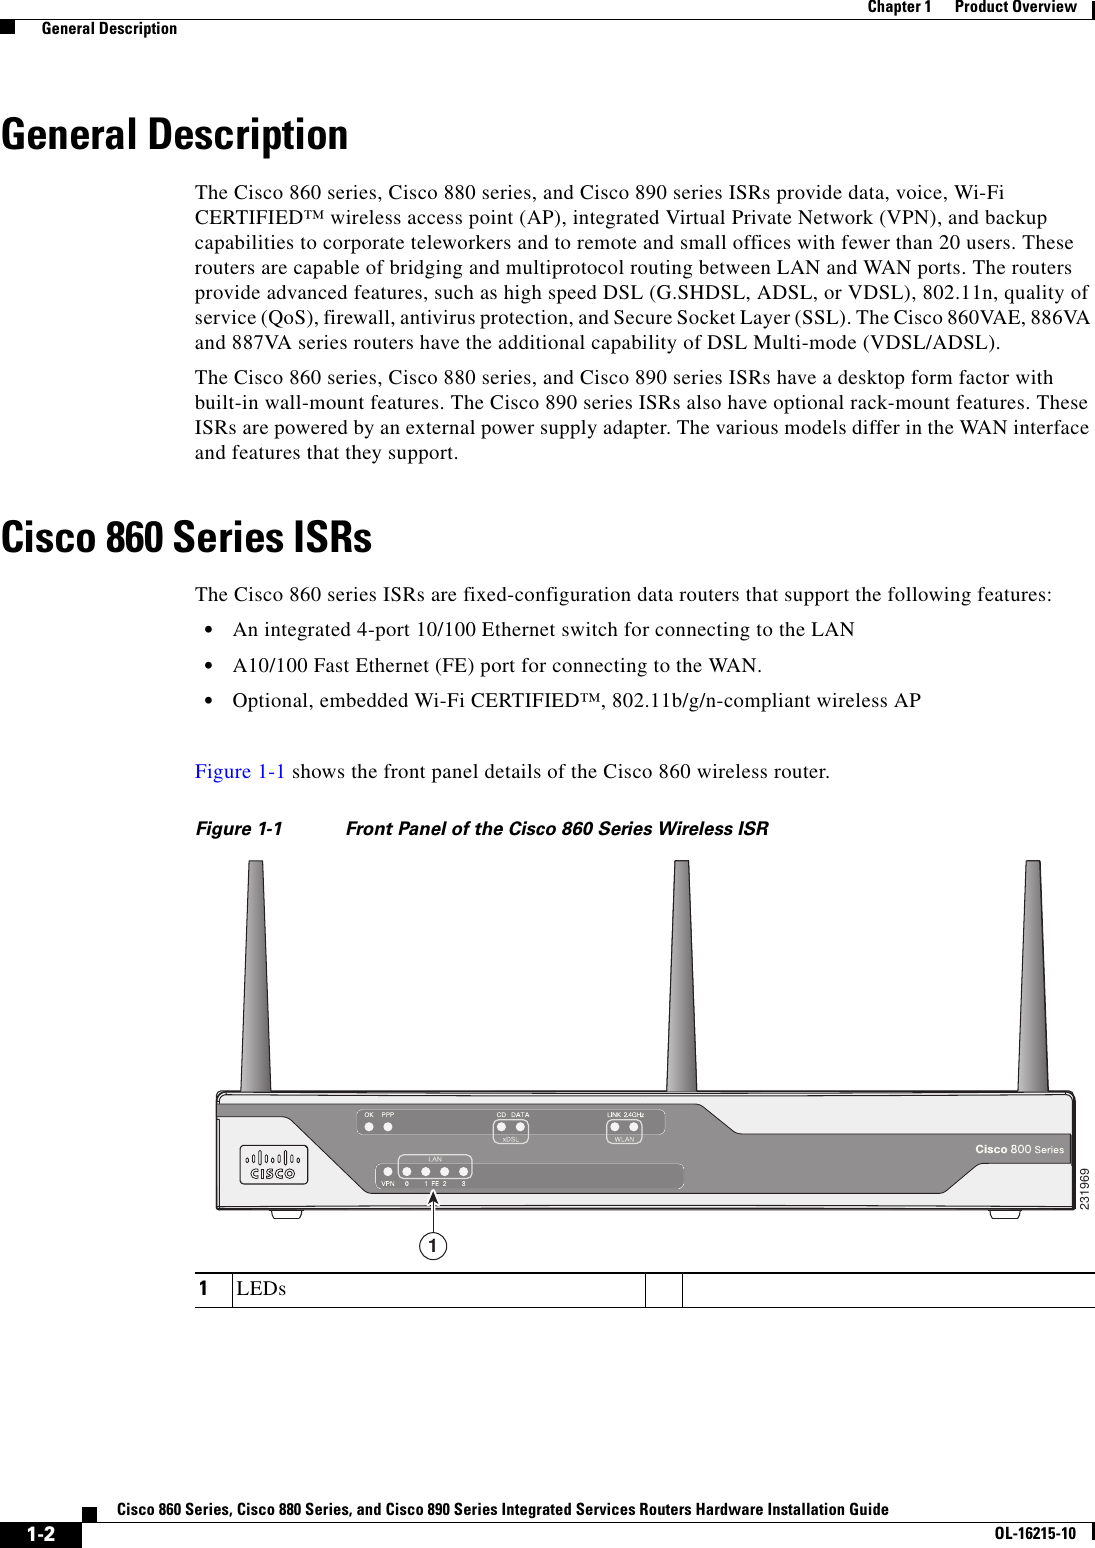  1-2Cisco 860 Series, Cisco 880 Series, and Cisco 890 Series Integrated Services Routers Hardware Installation GuideOL-16215-10Chapter 1      Product Overview  General DescriptionGeneral DescriptionThe Cisco 860 series, Cisco 880 series, and Cisco 890 series ISRs provide data, voice, Wi-Fi CERTIFIED™ wireless access point (AP), integrated Virtual Private Network (VPN), and backup capabilities to corporate teleworkers and to remote and small offices with fewer than 20 users. These routers are capable of bridging and multiprotocol routing between LAN and WAN ports. The routers provide advanced features, such as high speed DSL (G.SHDSL, ADSL, or VDSL), 802.11n, quality of service (QoS), firewall, antivirus protection, and Secure Socket Layer (SSL). The Cisco 860VAE, 886VA and 887VA series routers have the additional capability of DSL Multi-mode (VDSL/ADSL).The Cisco 860 series, Cisco 880 series, and Cisco 890 series ISRs have a desktop form factor with built-in wall-mount features. The Cisco 890 series ISRs also have optional rack-mount features. These ISRs are powered by an external power supply adapter. The various models differ in the WAN interface and features that they support.Cisco 860 Series ISRsThe Cisco 860 series ISRs are fixed-configuration data routers that support the following features:  • An integrated 4-port 10/100 Ethernet switch for connecting to the LAN   • A10/100 Fast Ethernet (FE) port for connecting to the WAN.  • Optional, embedded Wi-Fi CERTIFIED™, 802.11b/g/n-compliant wireless APFigure 1-1 shows the front panel details of the Cisco 860 wireless router.Figure 1-1 Front Panel of the Cisco 860 Series Wireless ISR1LEDs2319691